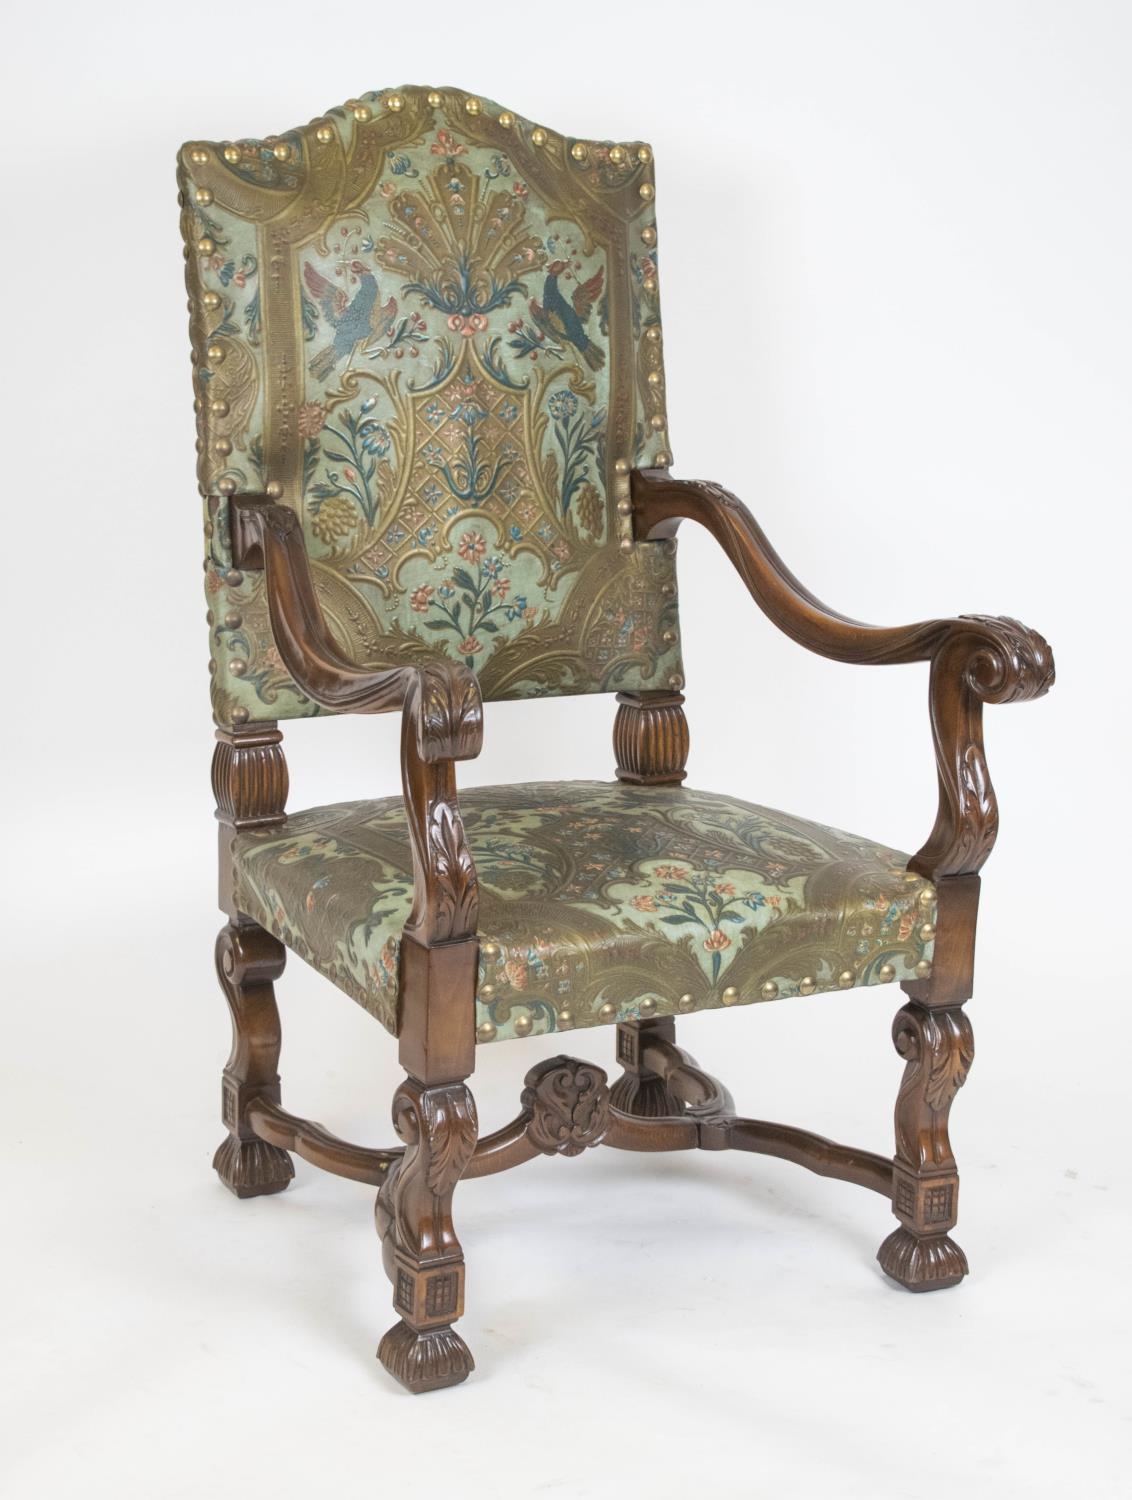 THRONE CHAIR, 121cm H x 72cm W x 70cm D, Louis XIV style in polychrome embossed leather.